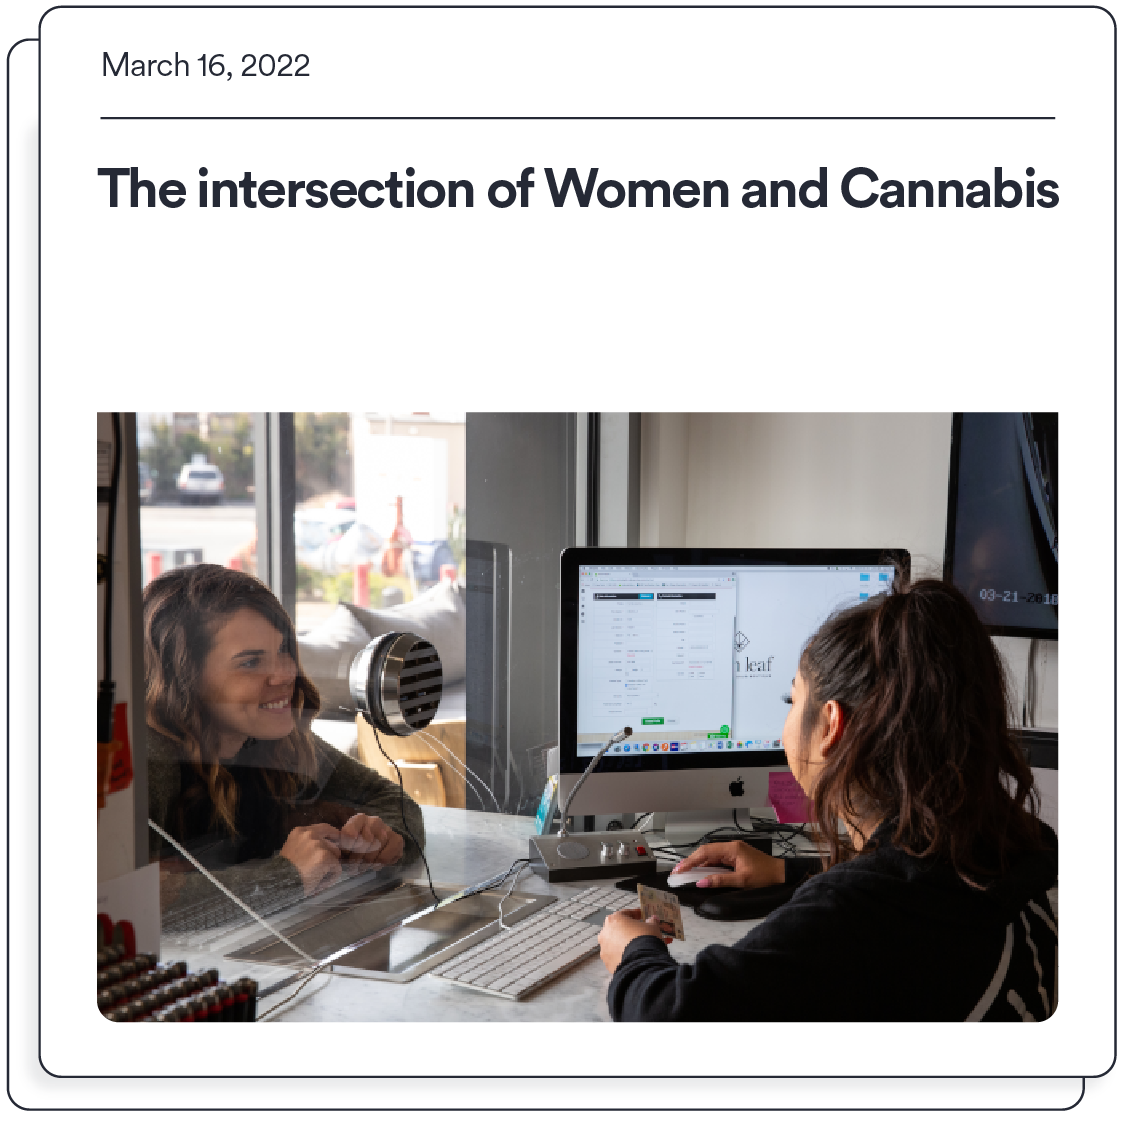 Women and Cannabis